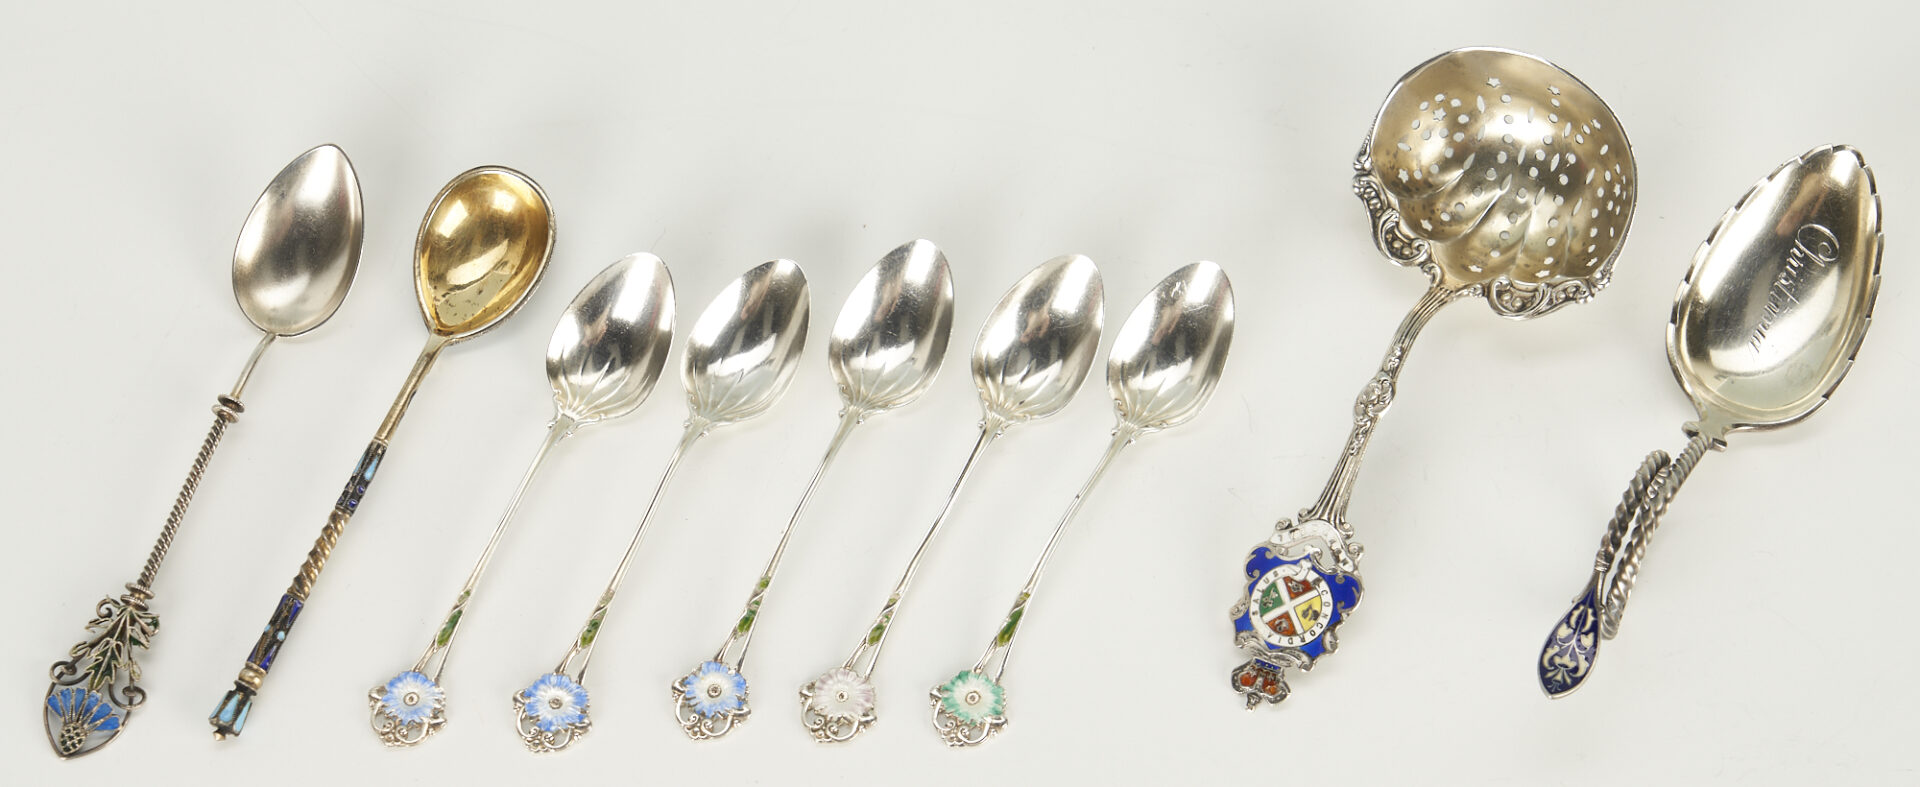 Lot 728: 30 Assorted Enameled Silver & Silver Items, incl. David Anderson